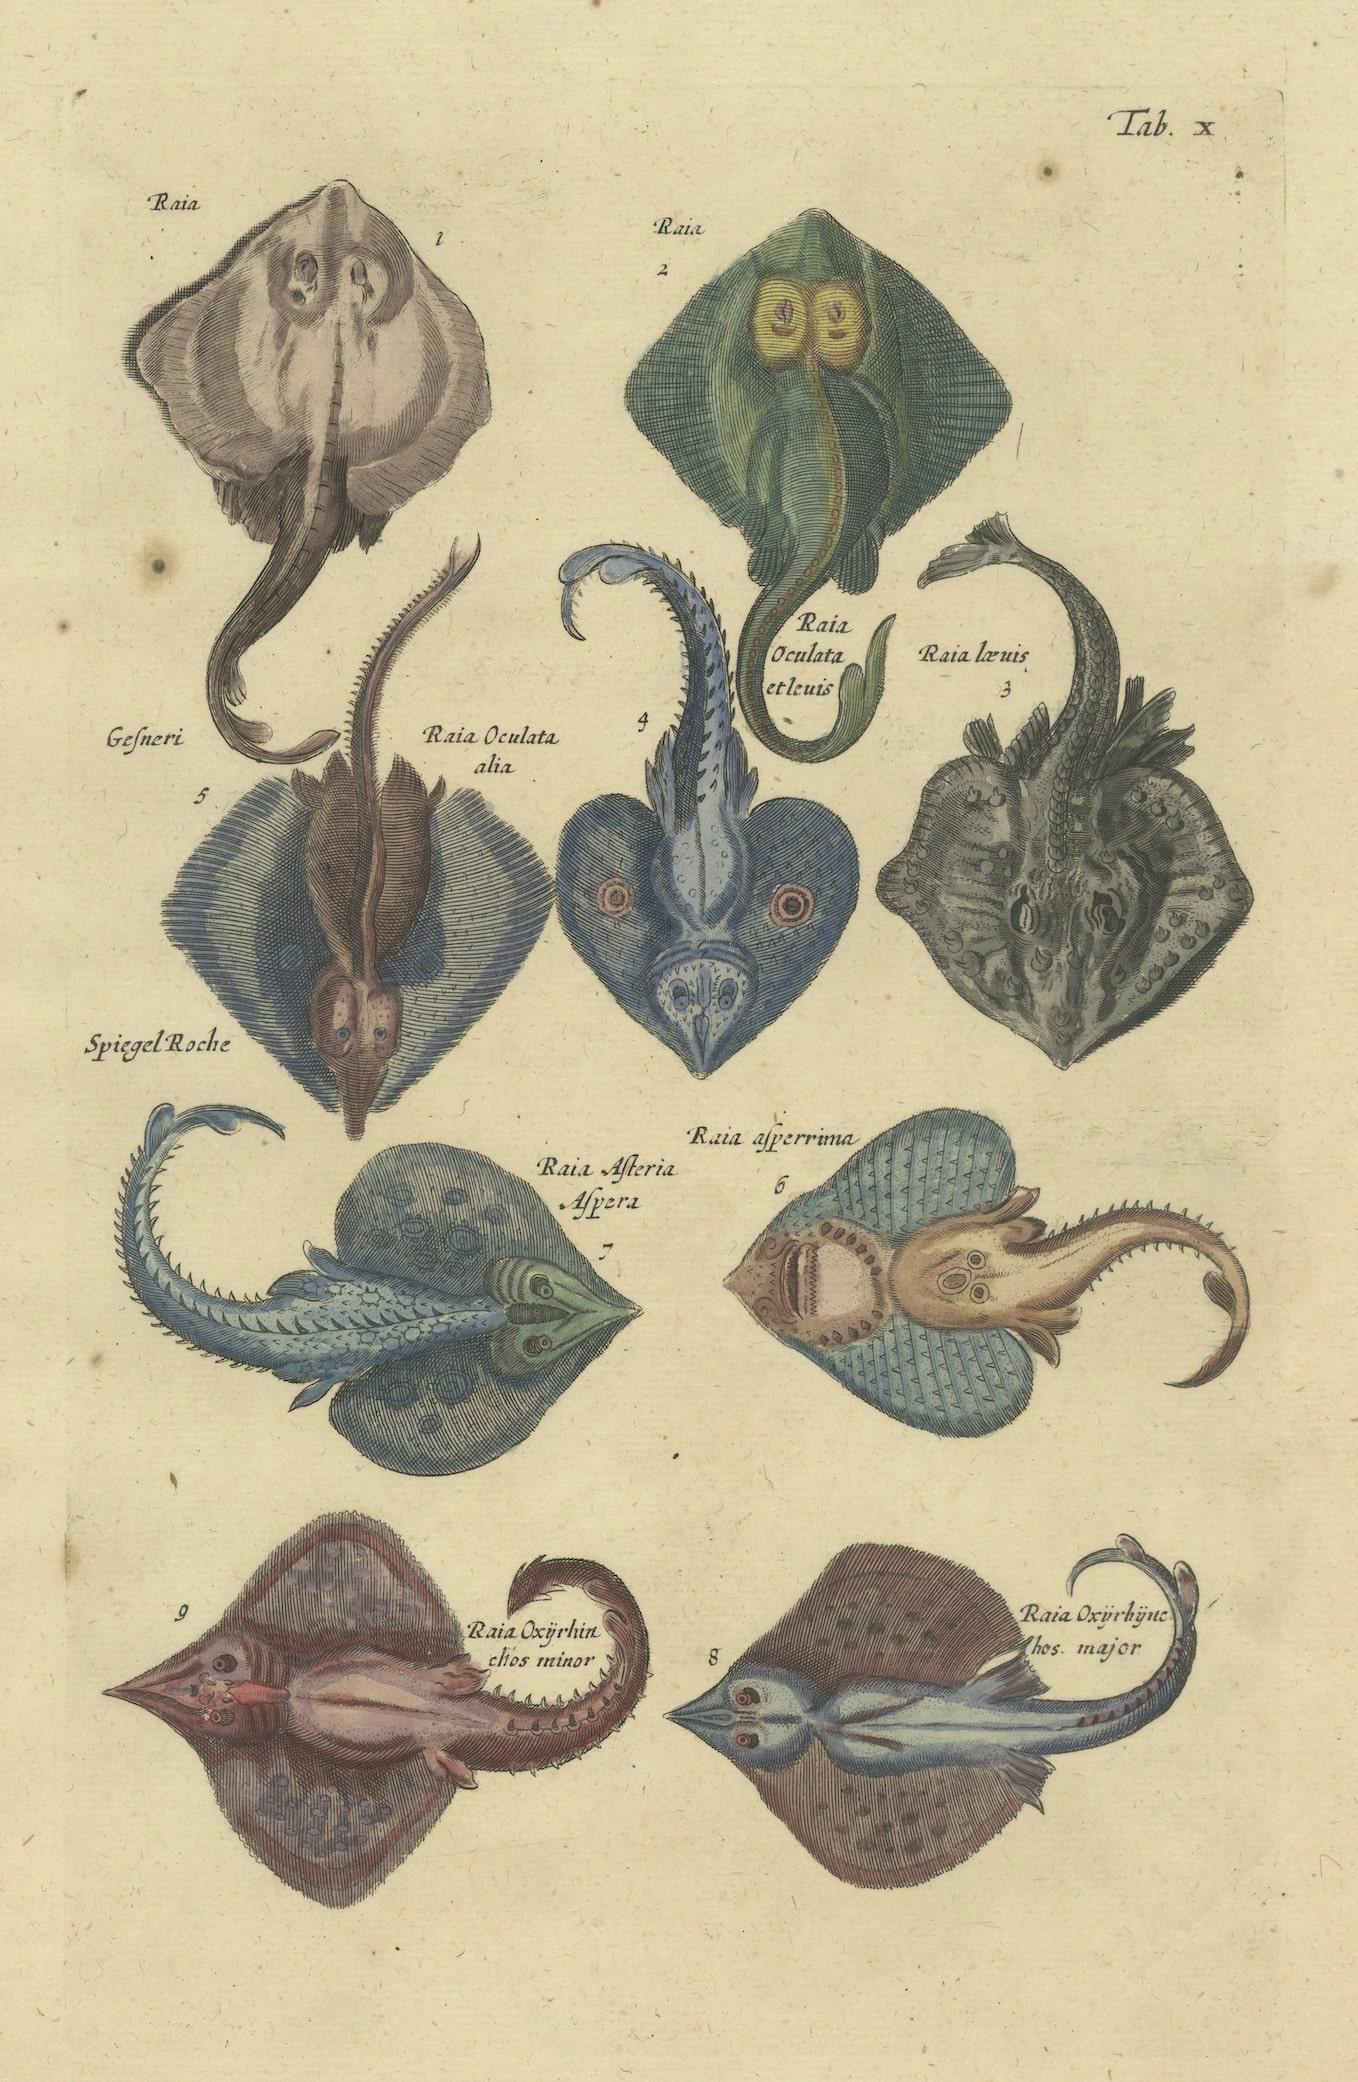 Antique print of illustrating several raja species. Raja, also known as raia, is a genus of skates in the family Rajidae containing 16 species. It includes the brown ray and many others. These rare hand colored copperplate engraving has been